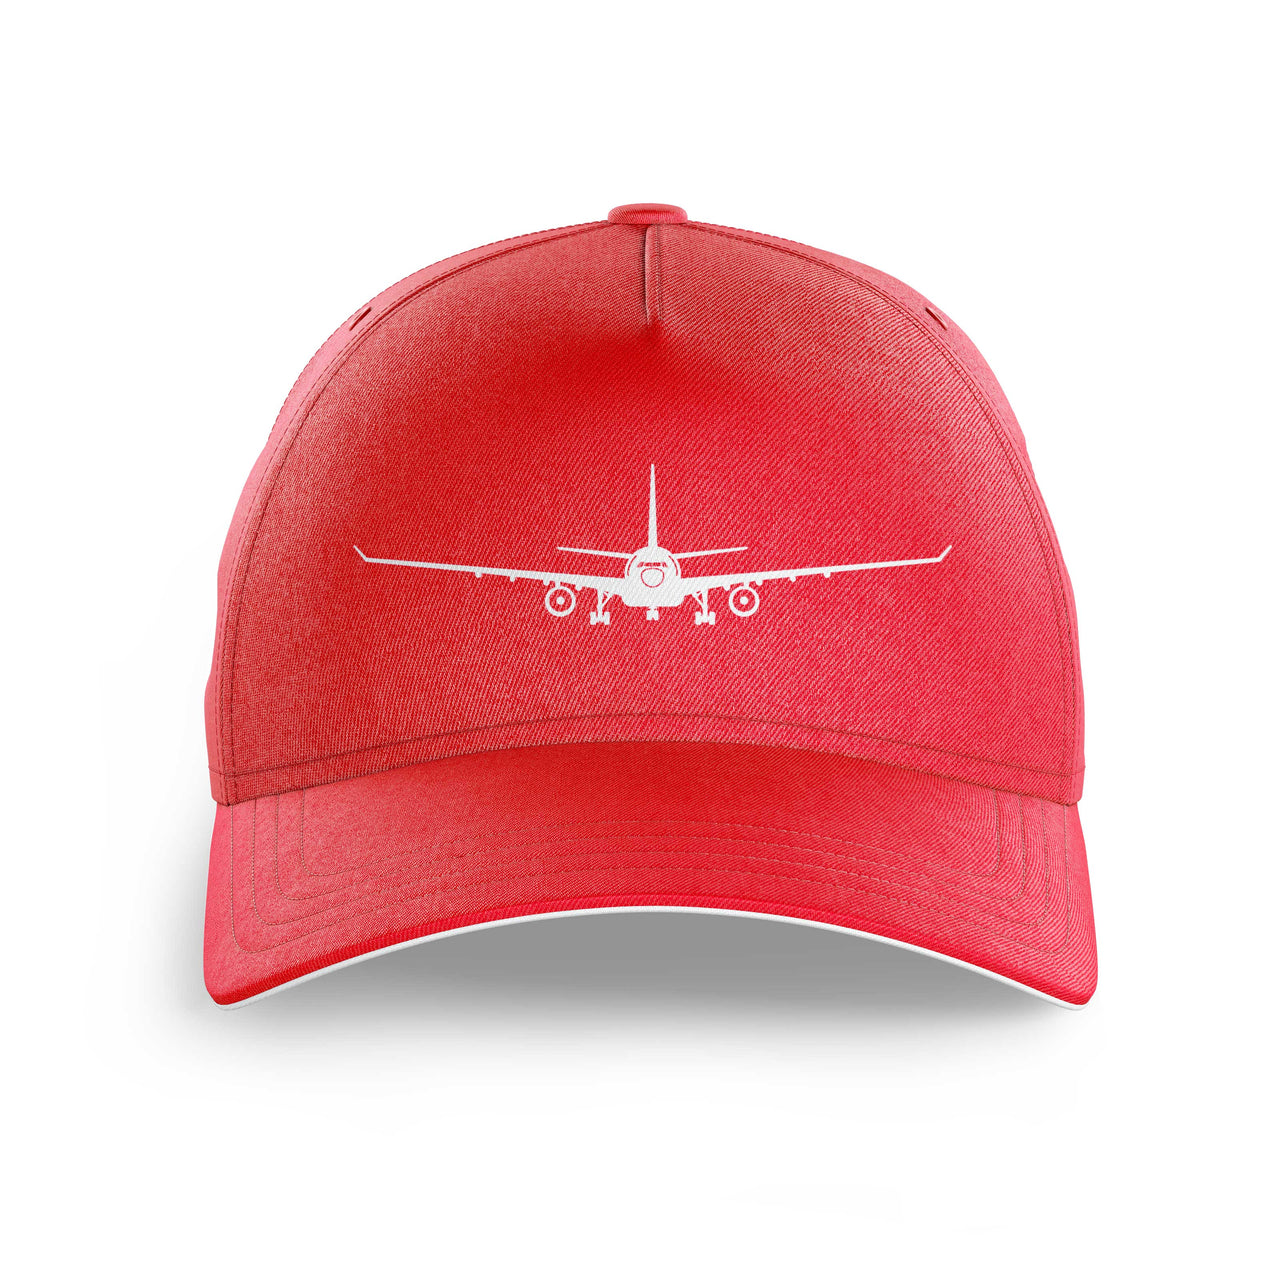 Airbus A330 Silhouette Printed Hats